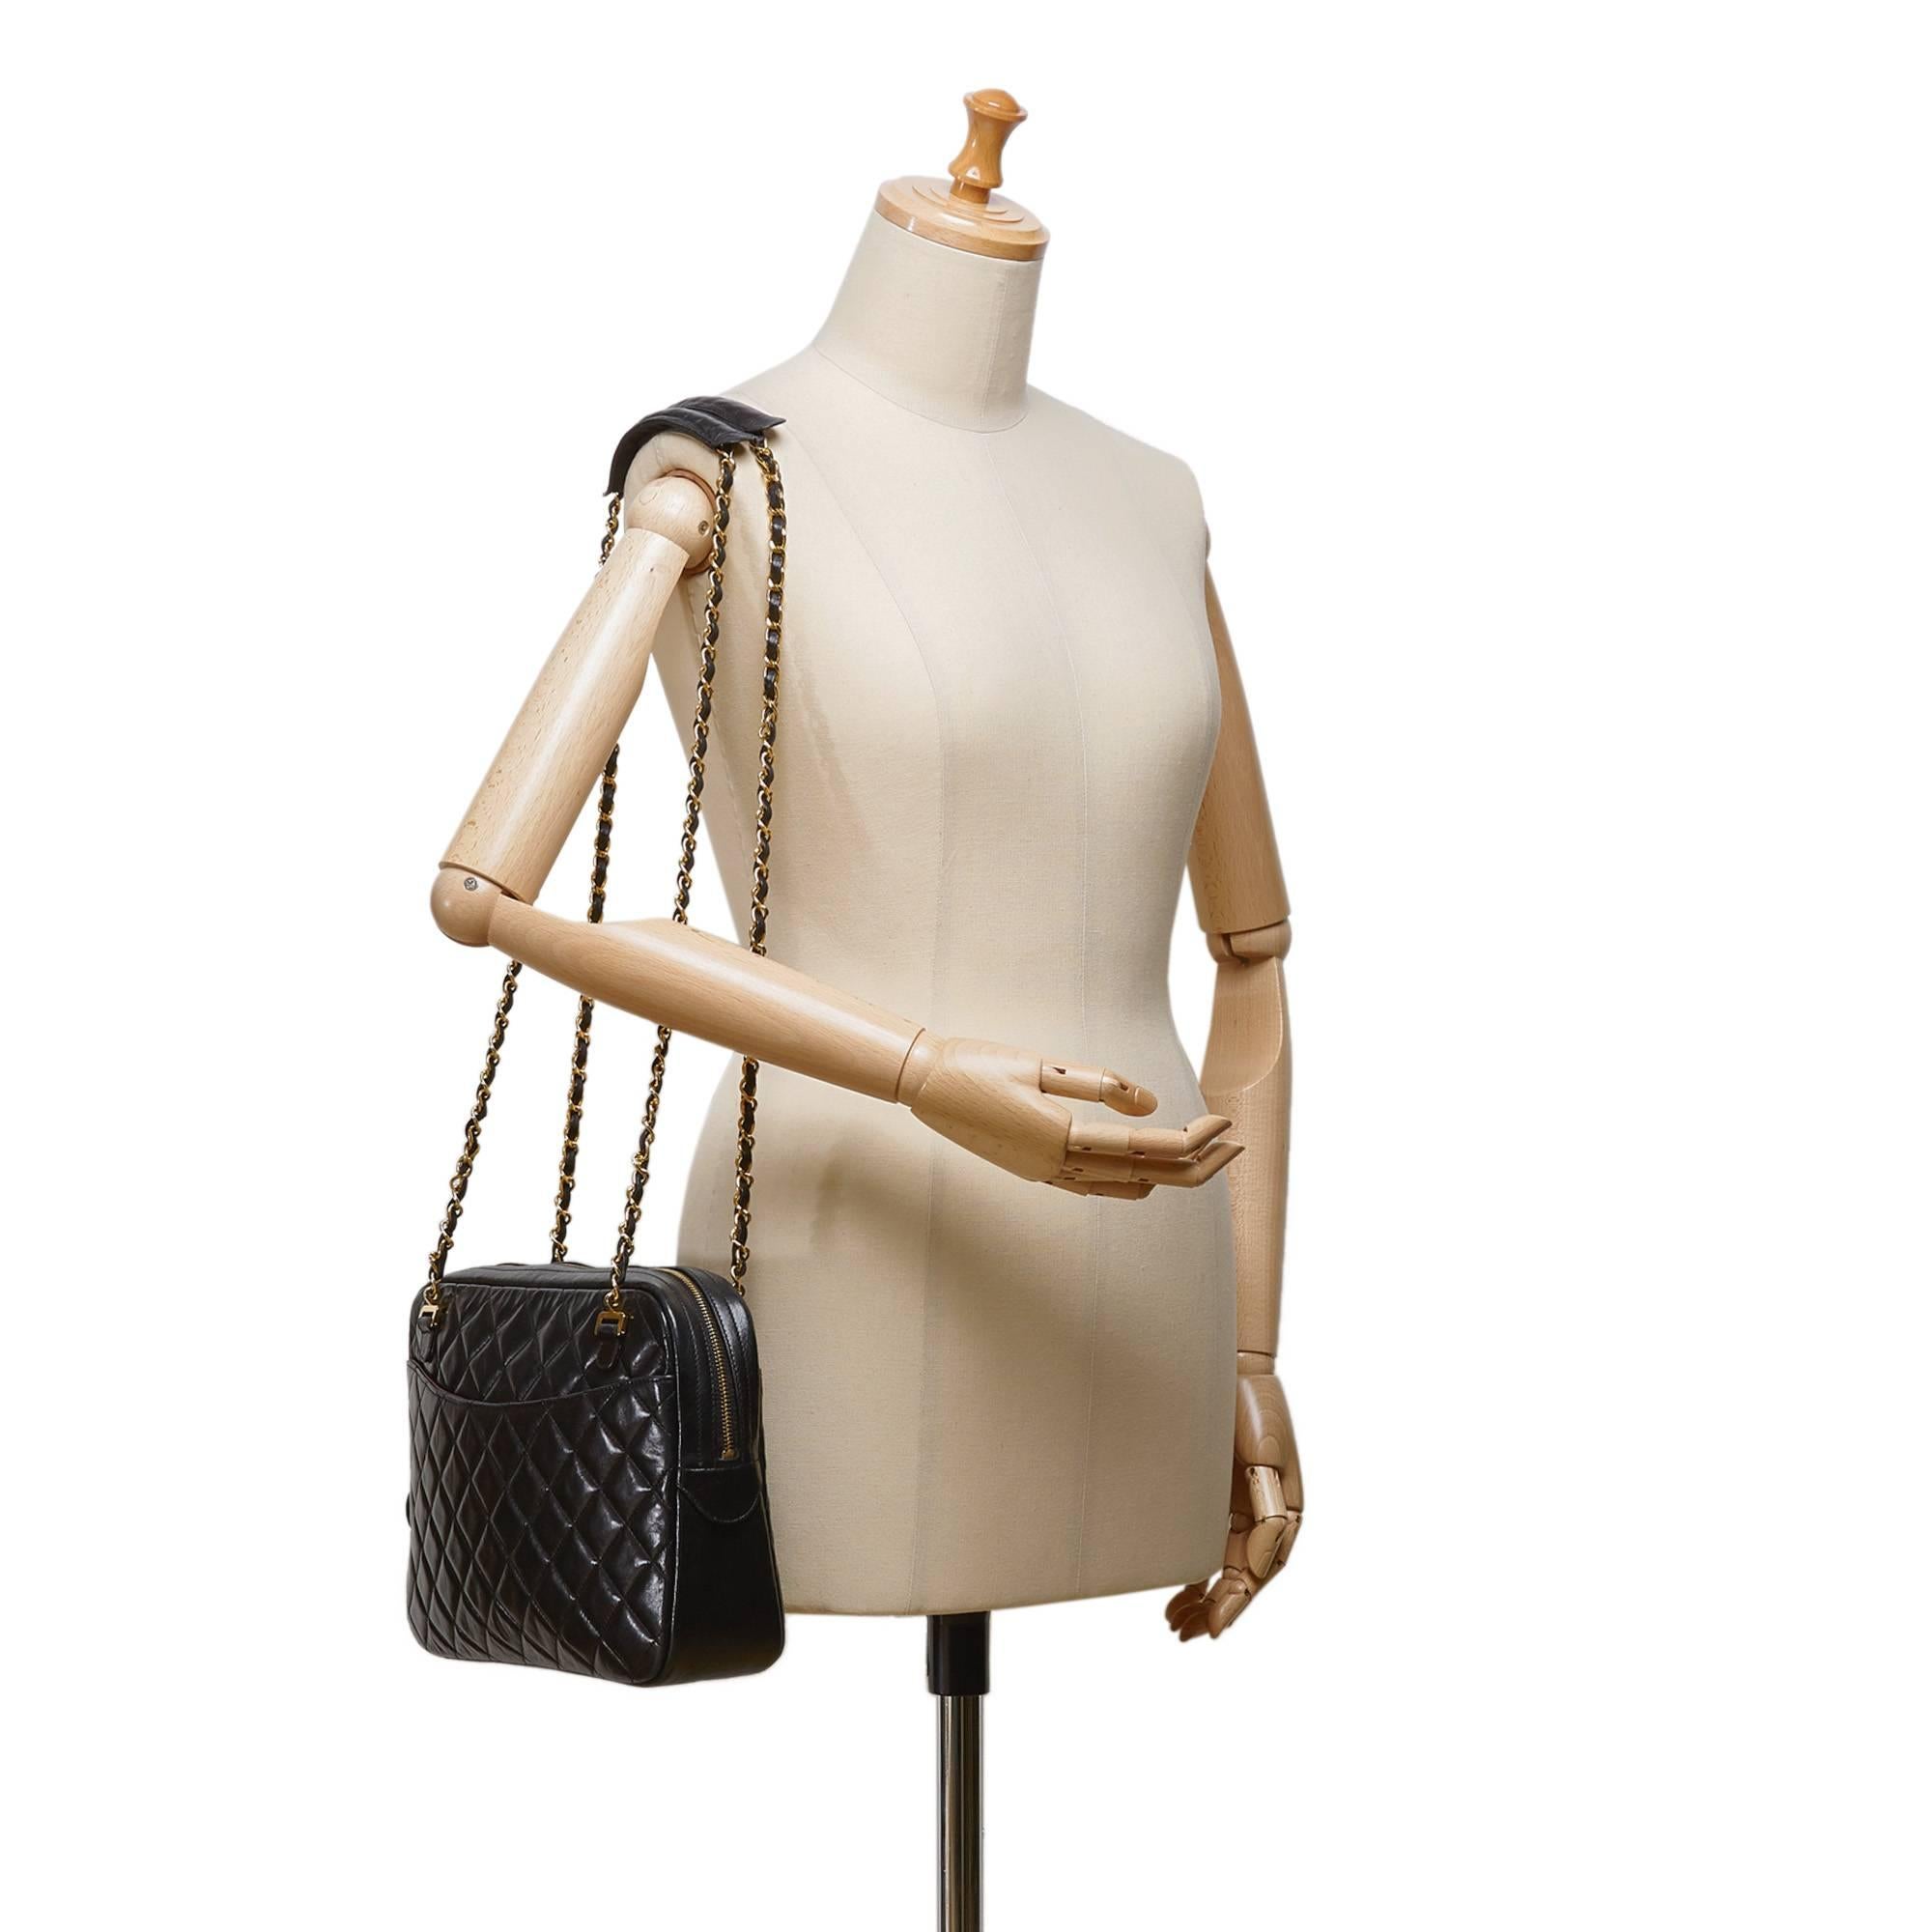 - Vintage 80s Chanel black quilted Matelasse lambskin shoulder bag. 

- Featuring an exterior front and back open pockets. 

- Gold-toned chain shoulder strap. 

- Top zip closure with interlocking 